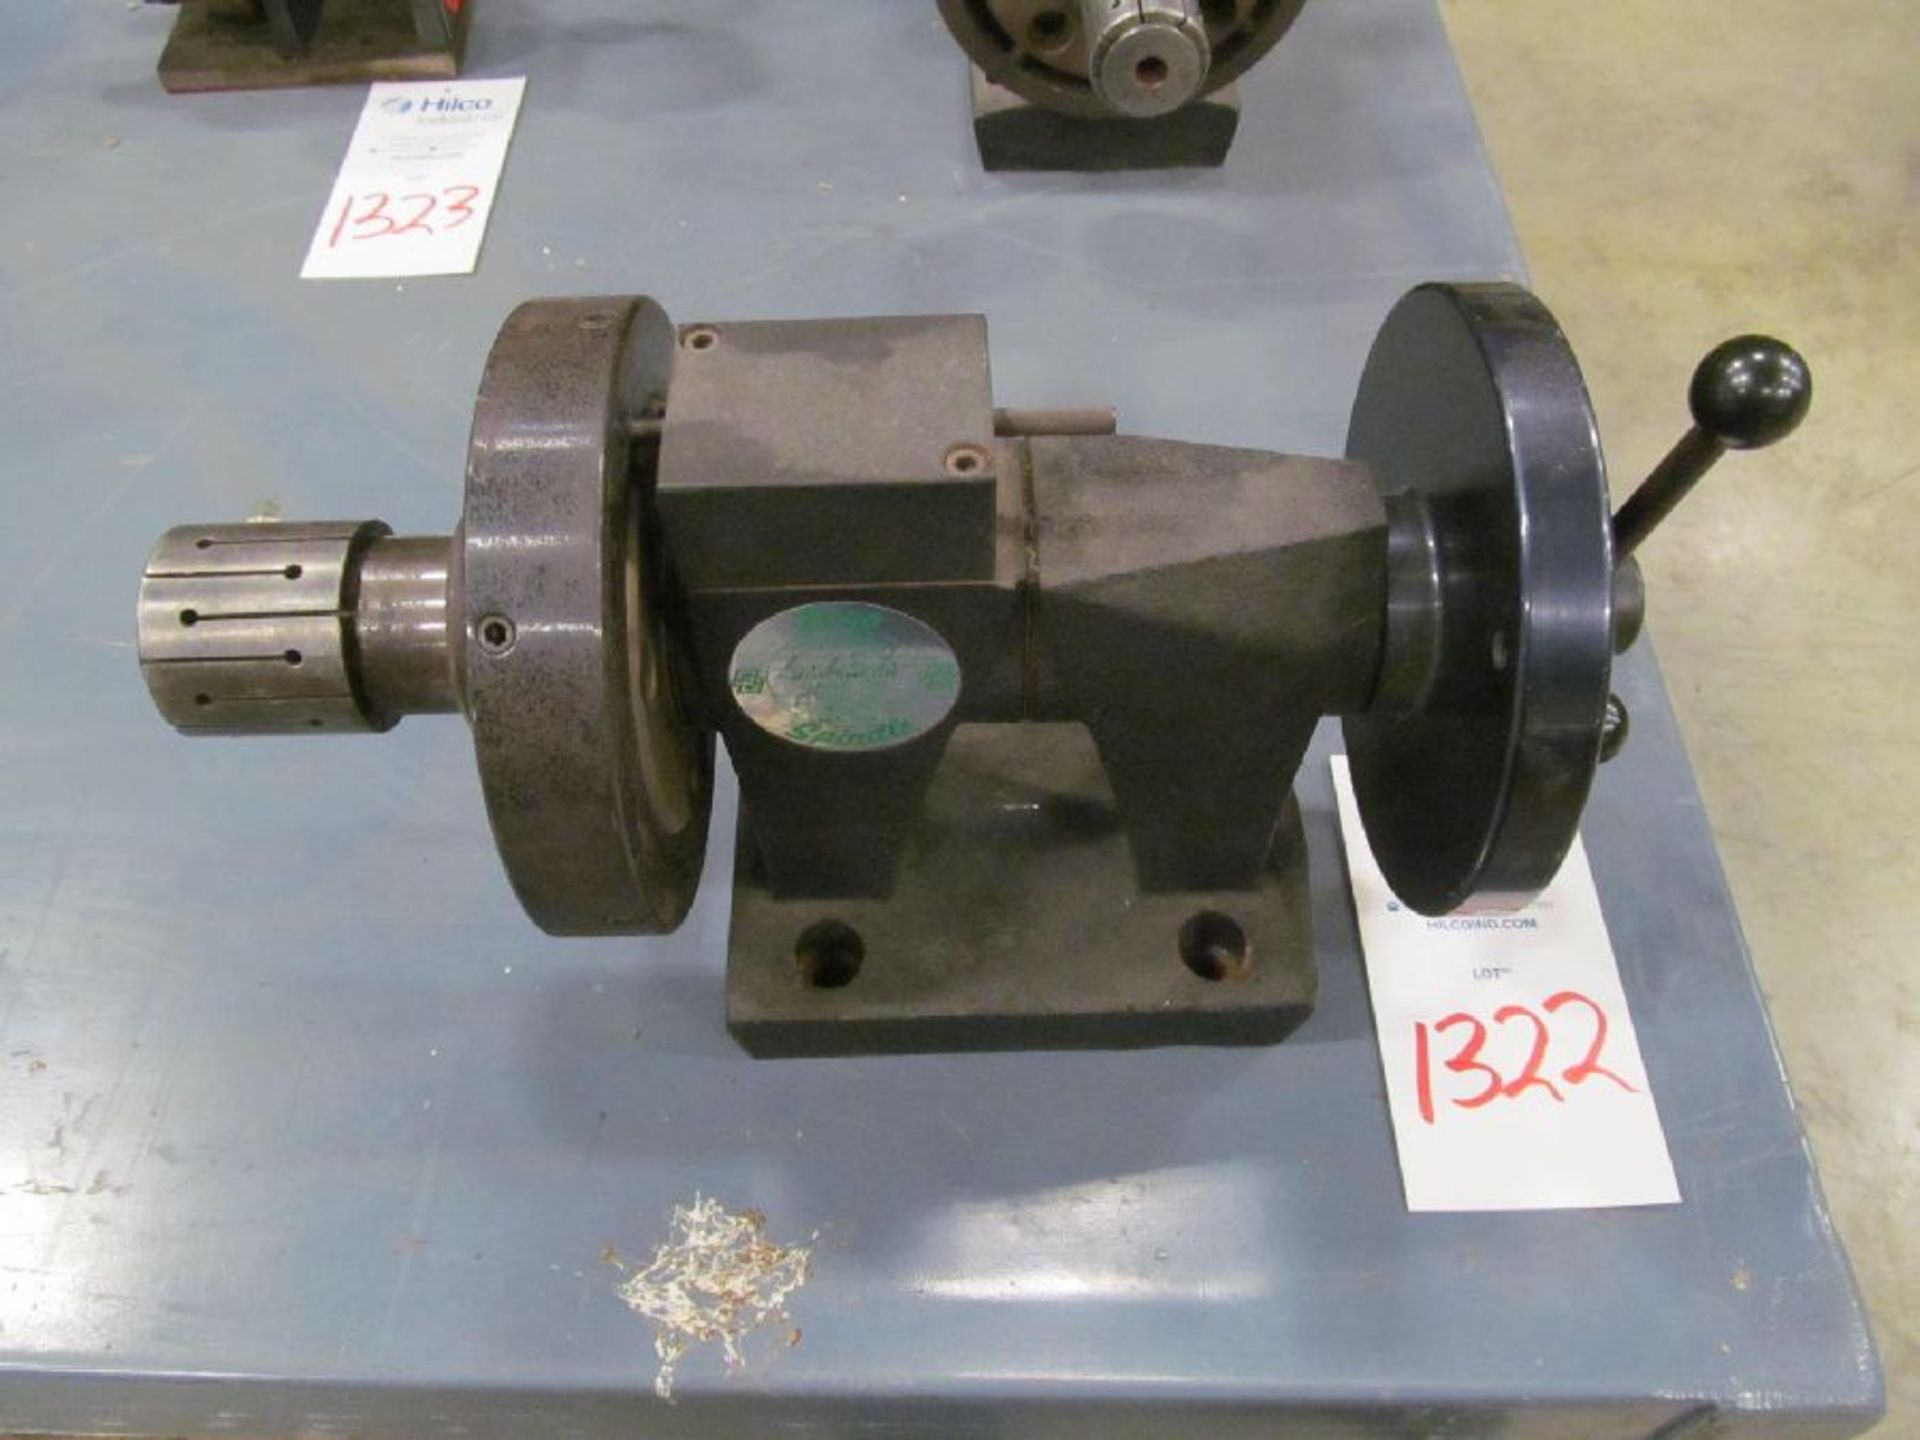 Southern Gage AD-015 Zero Spindle